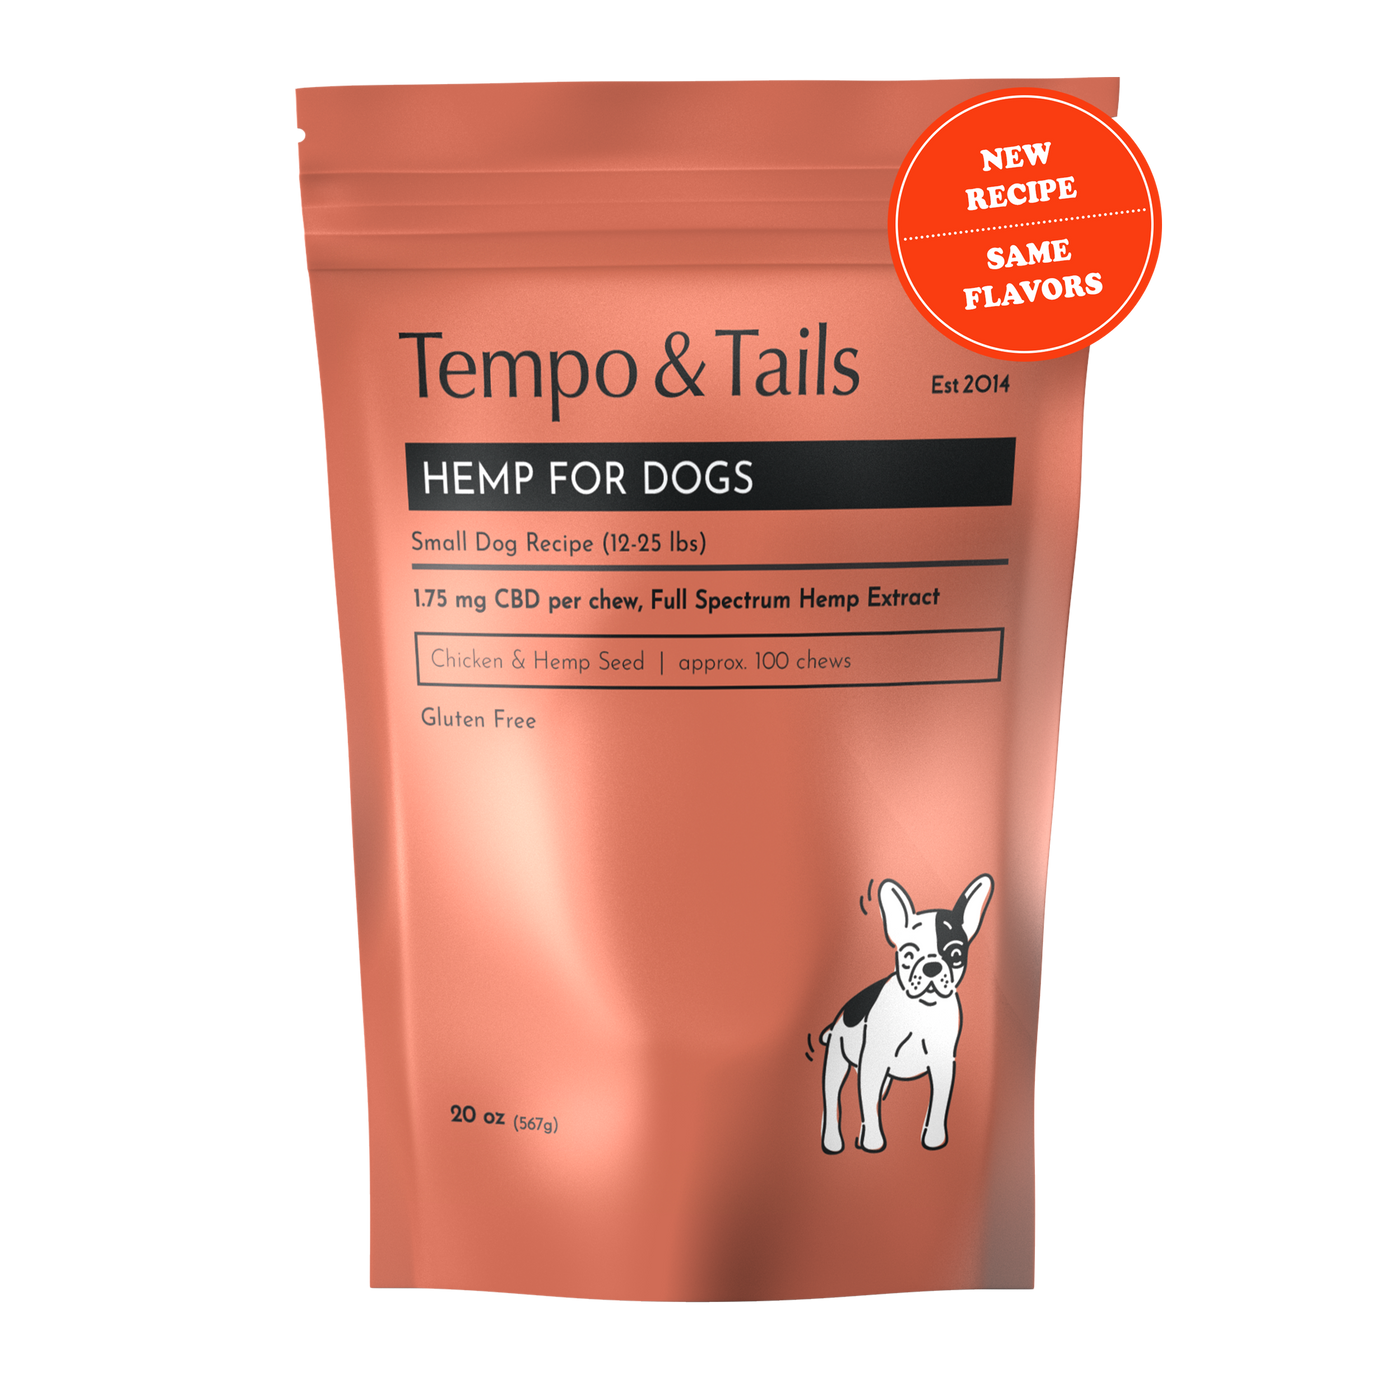 Chicken Treats for Small Dogs (12-25 Lbs.)